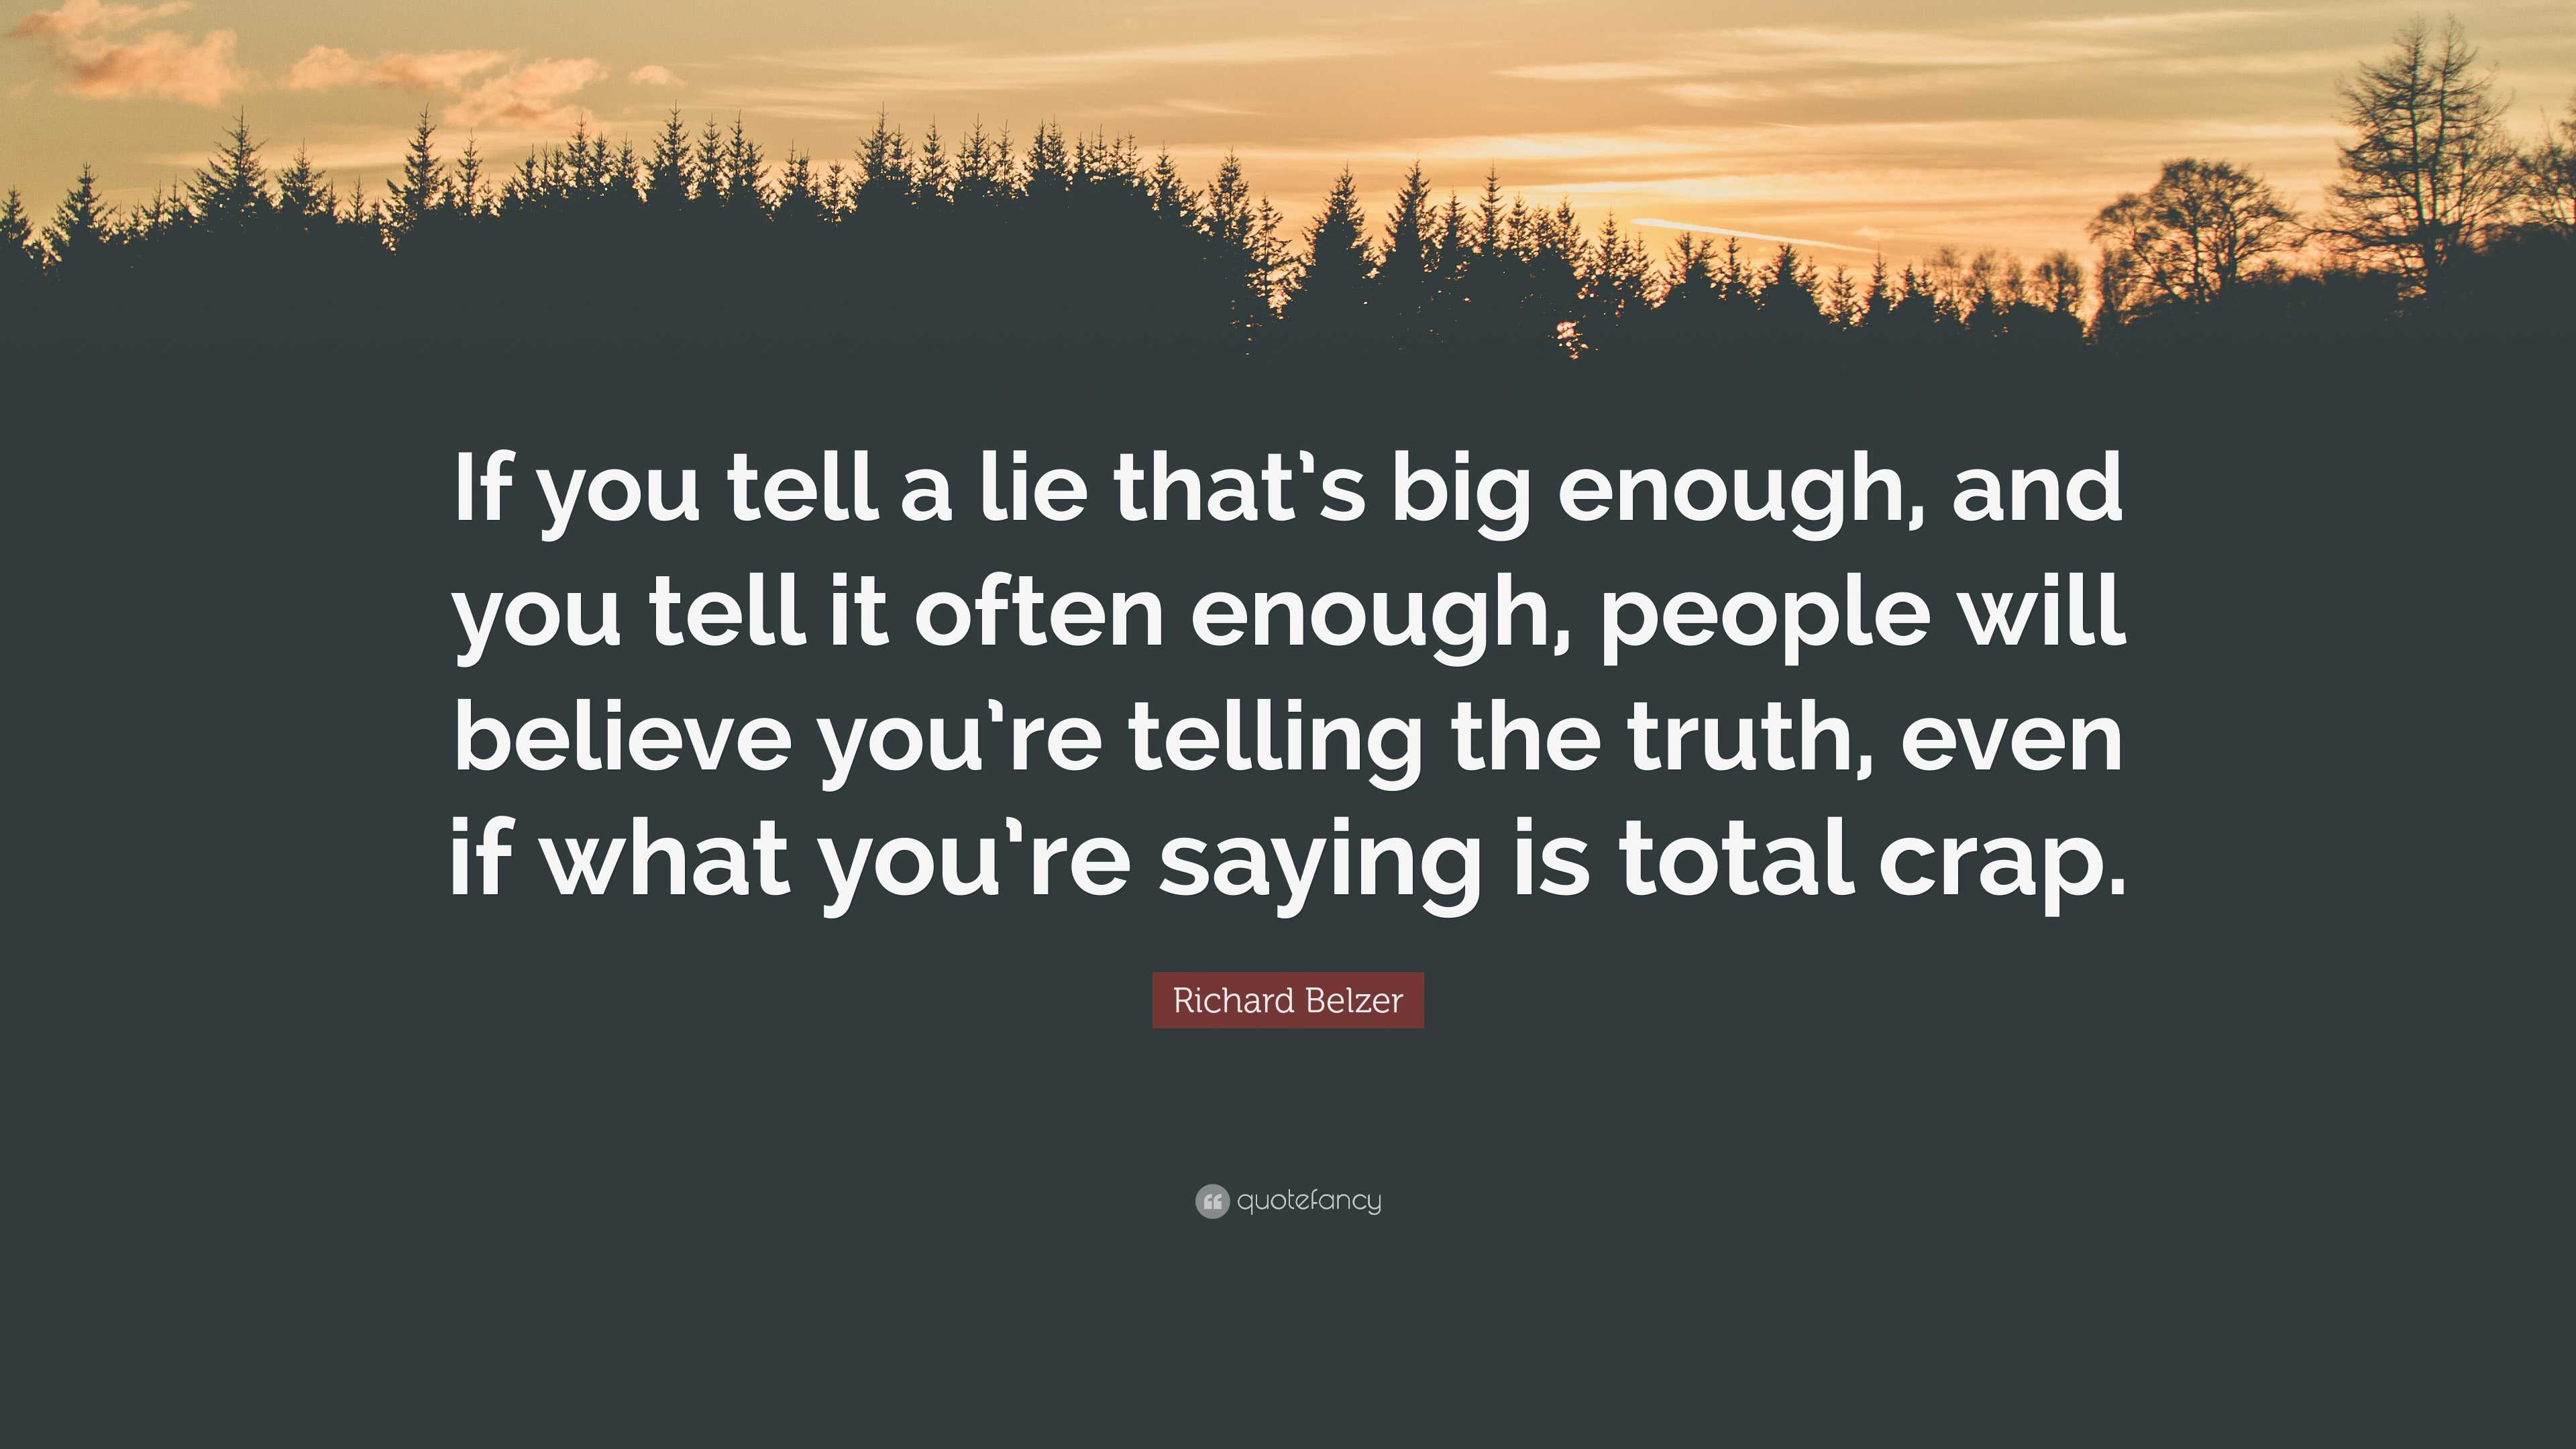 Richard Belzer Quote: “If you tell a lie that's big enough, and you tell it  often enough, people will believe you're telling the truth, even if”